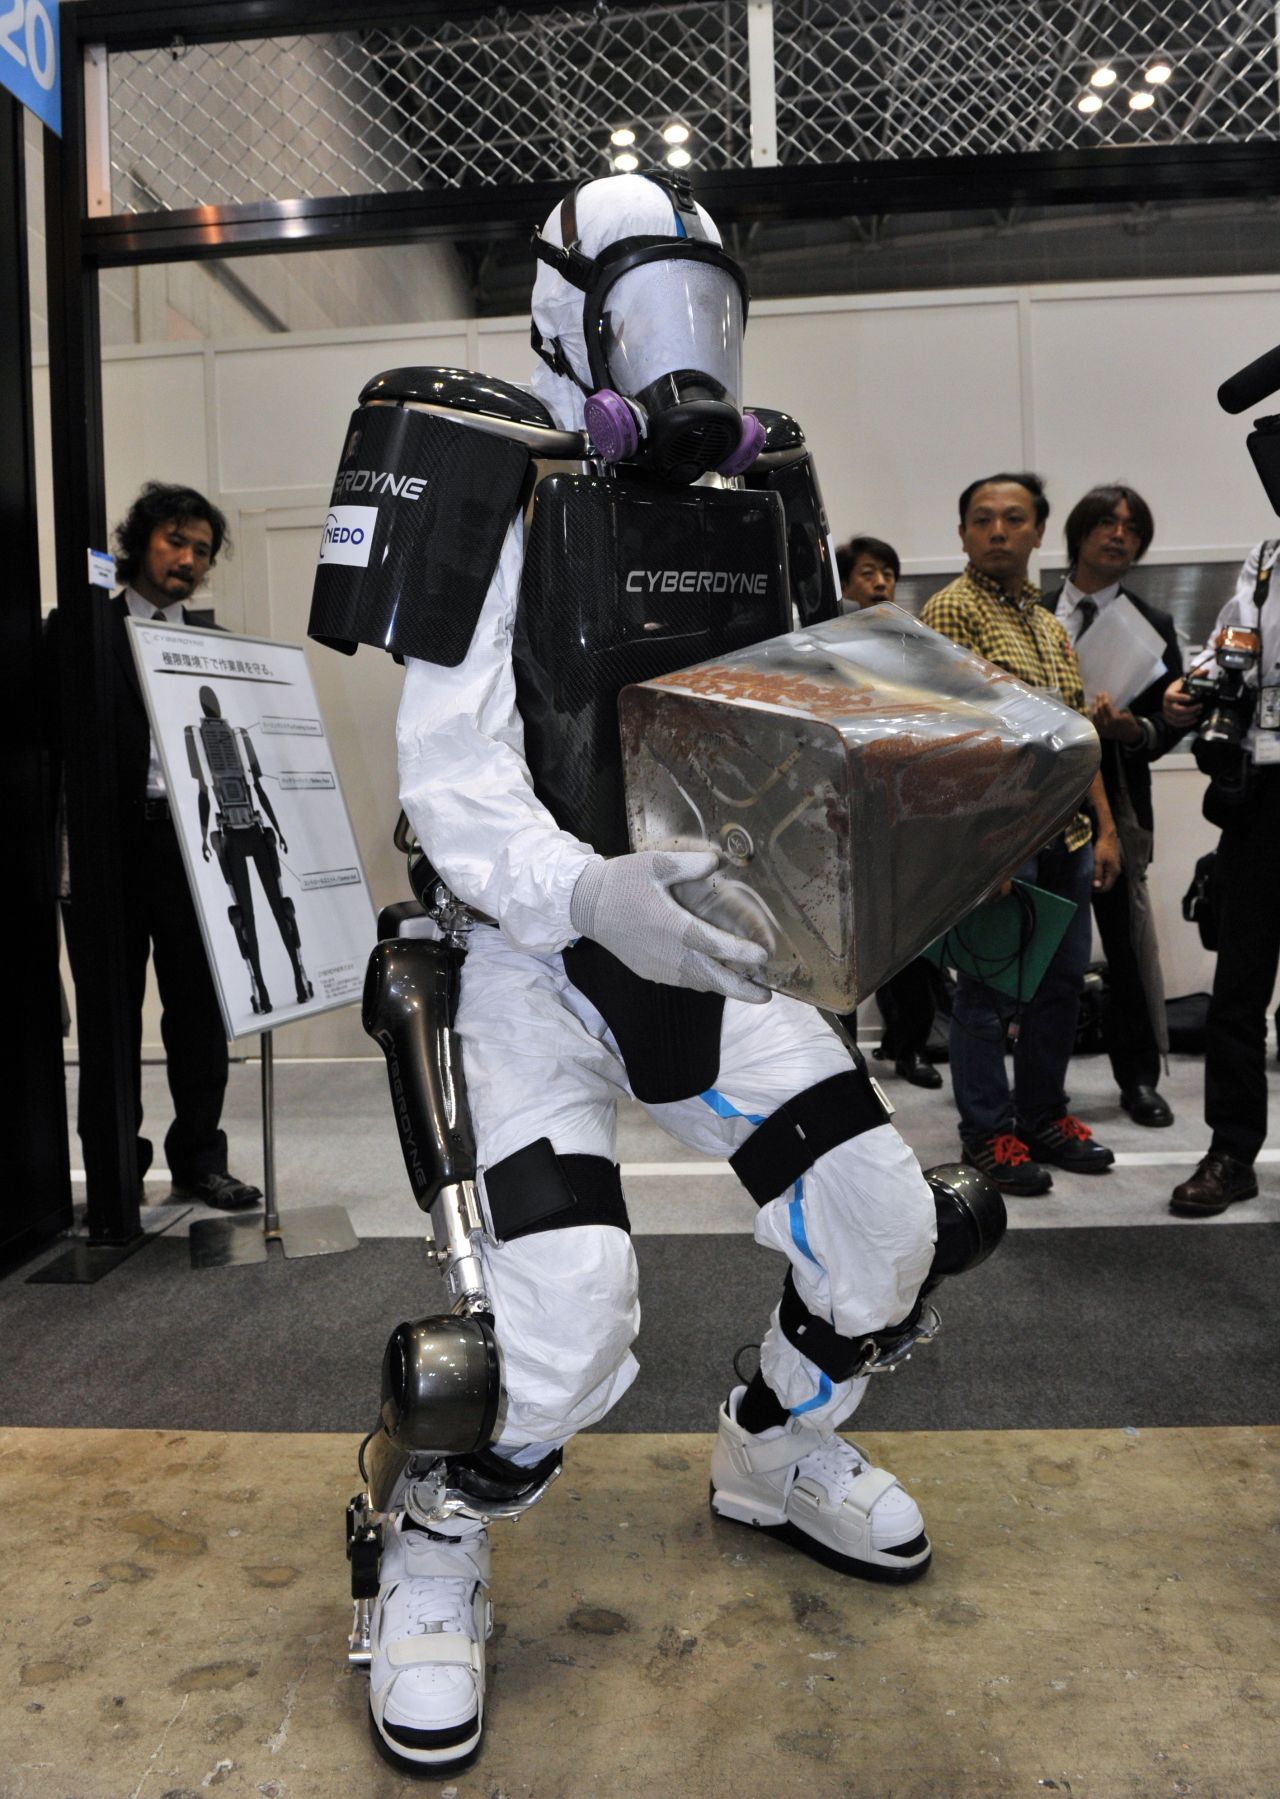 Also developed in the wake of the Fukushima nuclear disaster, this protective suit allows emergency services to act very quickly in the event of a nuclear meltdown. The suit's maker's claim that the "brainwave-controlled" exoskeleton allows workers to wear heavy radiation protection without feeling the weight. Sensors detect signals from the brain and the robot's limbs move in tandem with the wearer's, taking weight off the muscles. It is the creation of Japanese tech firm Cyberdyne, who initially developed the technology to help assist people with disabilities.